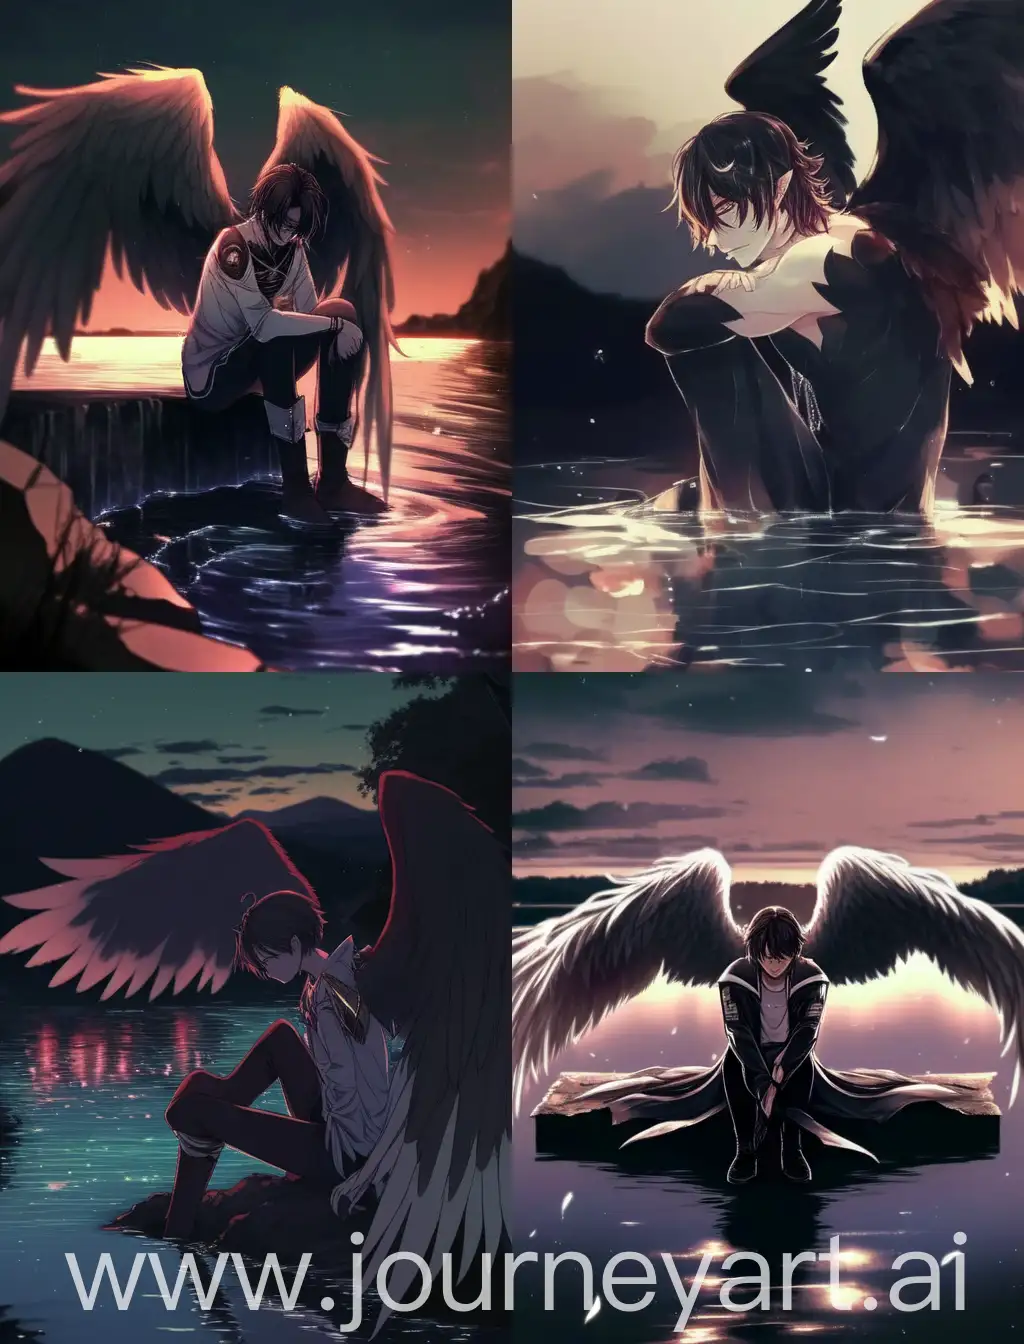 perfect anime fallen angels lock screen wallpaper for my device, dark, male, hot, devilish, smooth undercut hairstyle, dark, eren yeager, the dragon lord of waves, sitting next to a river